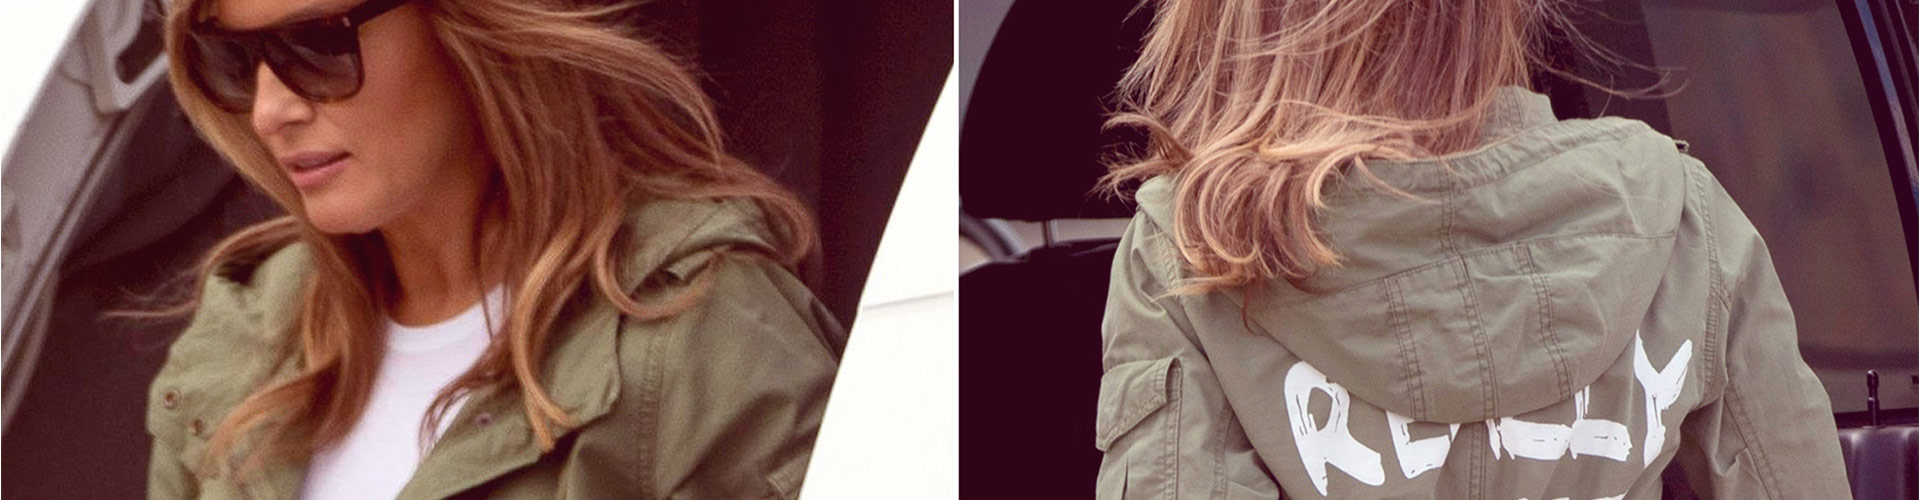 Blog banner featuring two paparazzi photos of Melania Trump in green jacket with painted text on the back